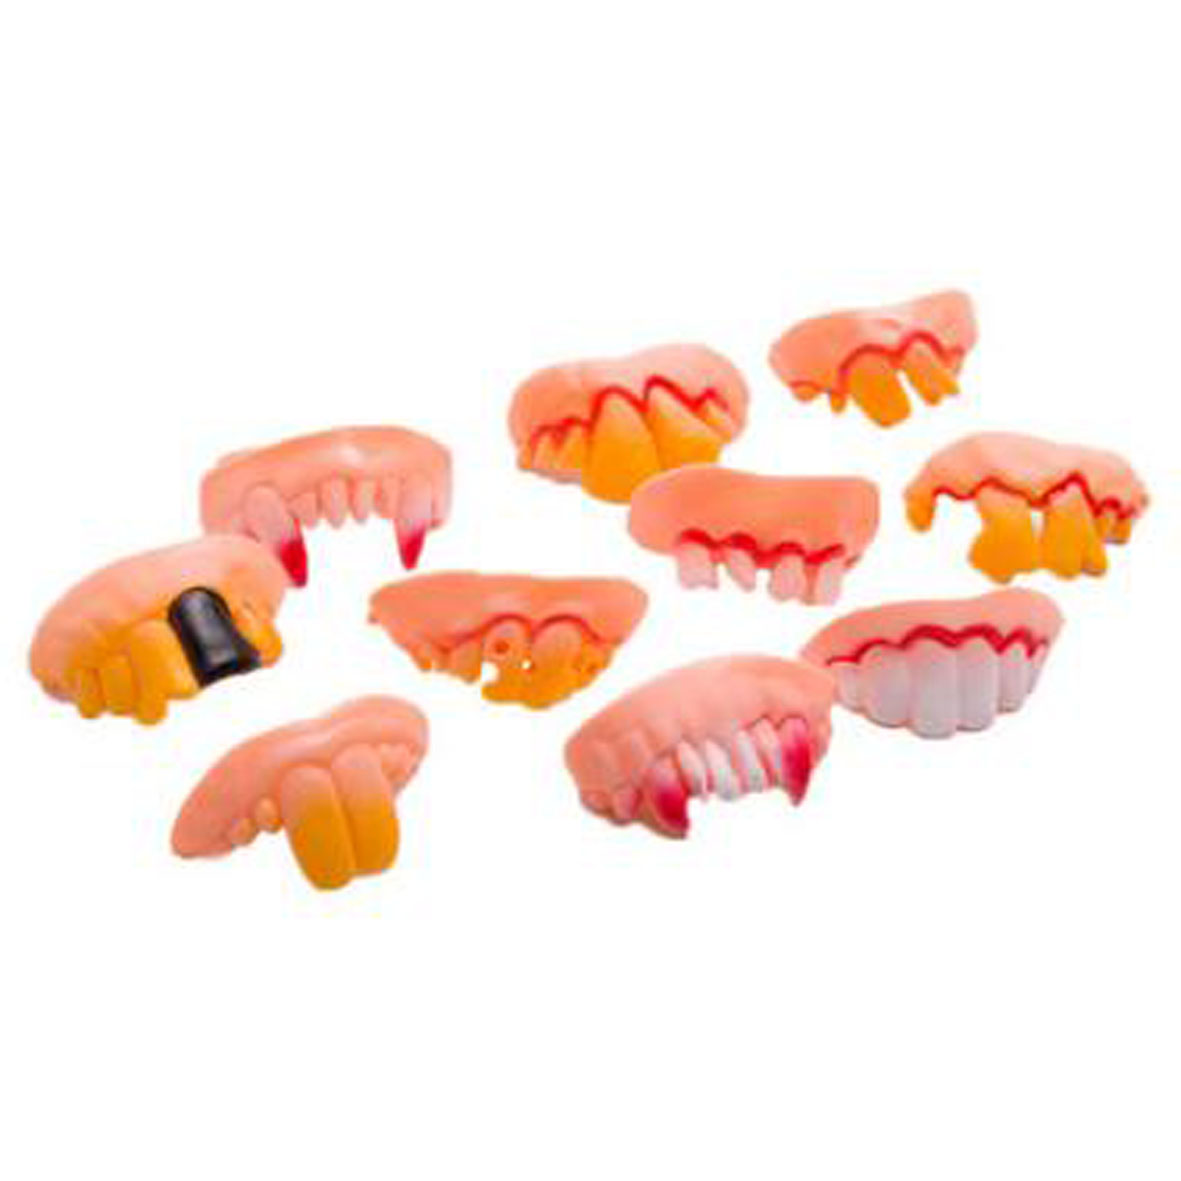 GL-AAA1184 Different Style Ugly Fake Teeth for Halloween